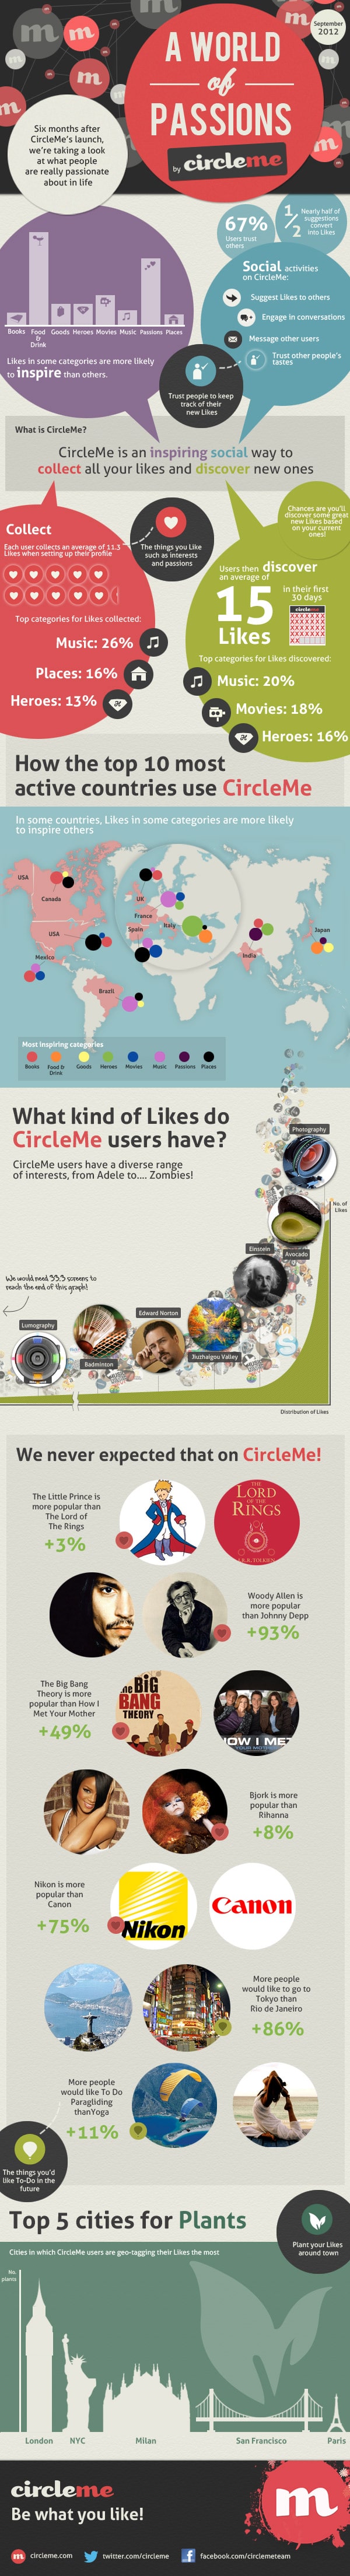 CircleMe Users Passions Infographic